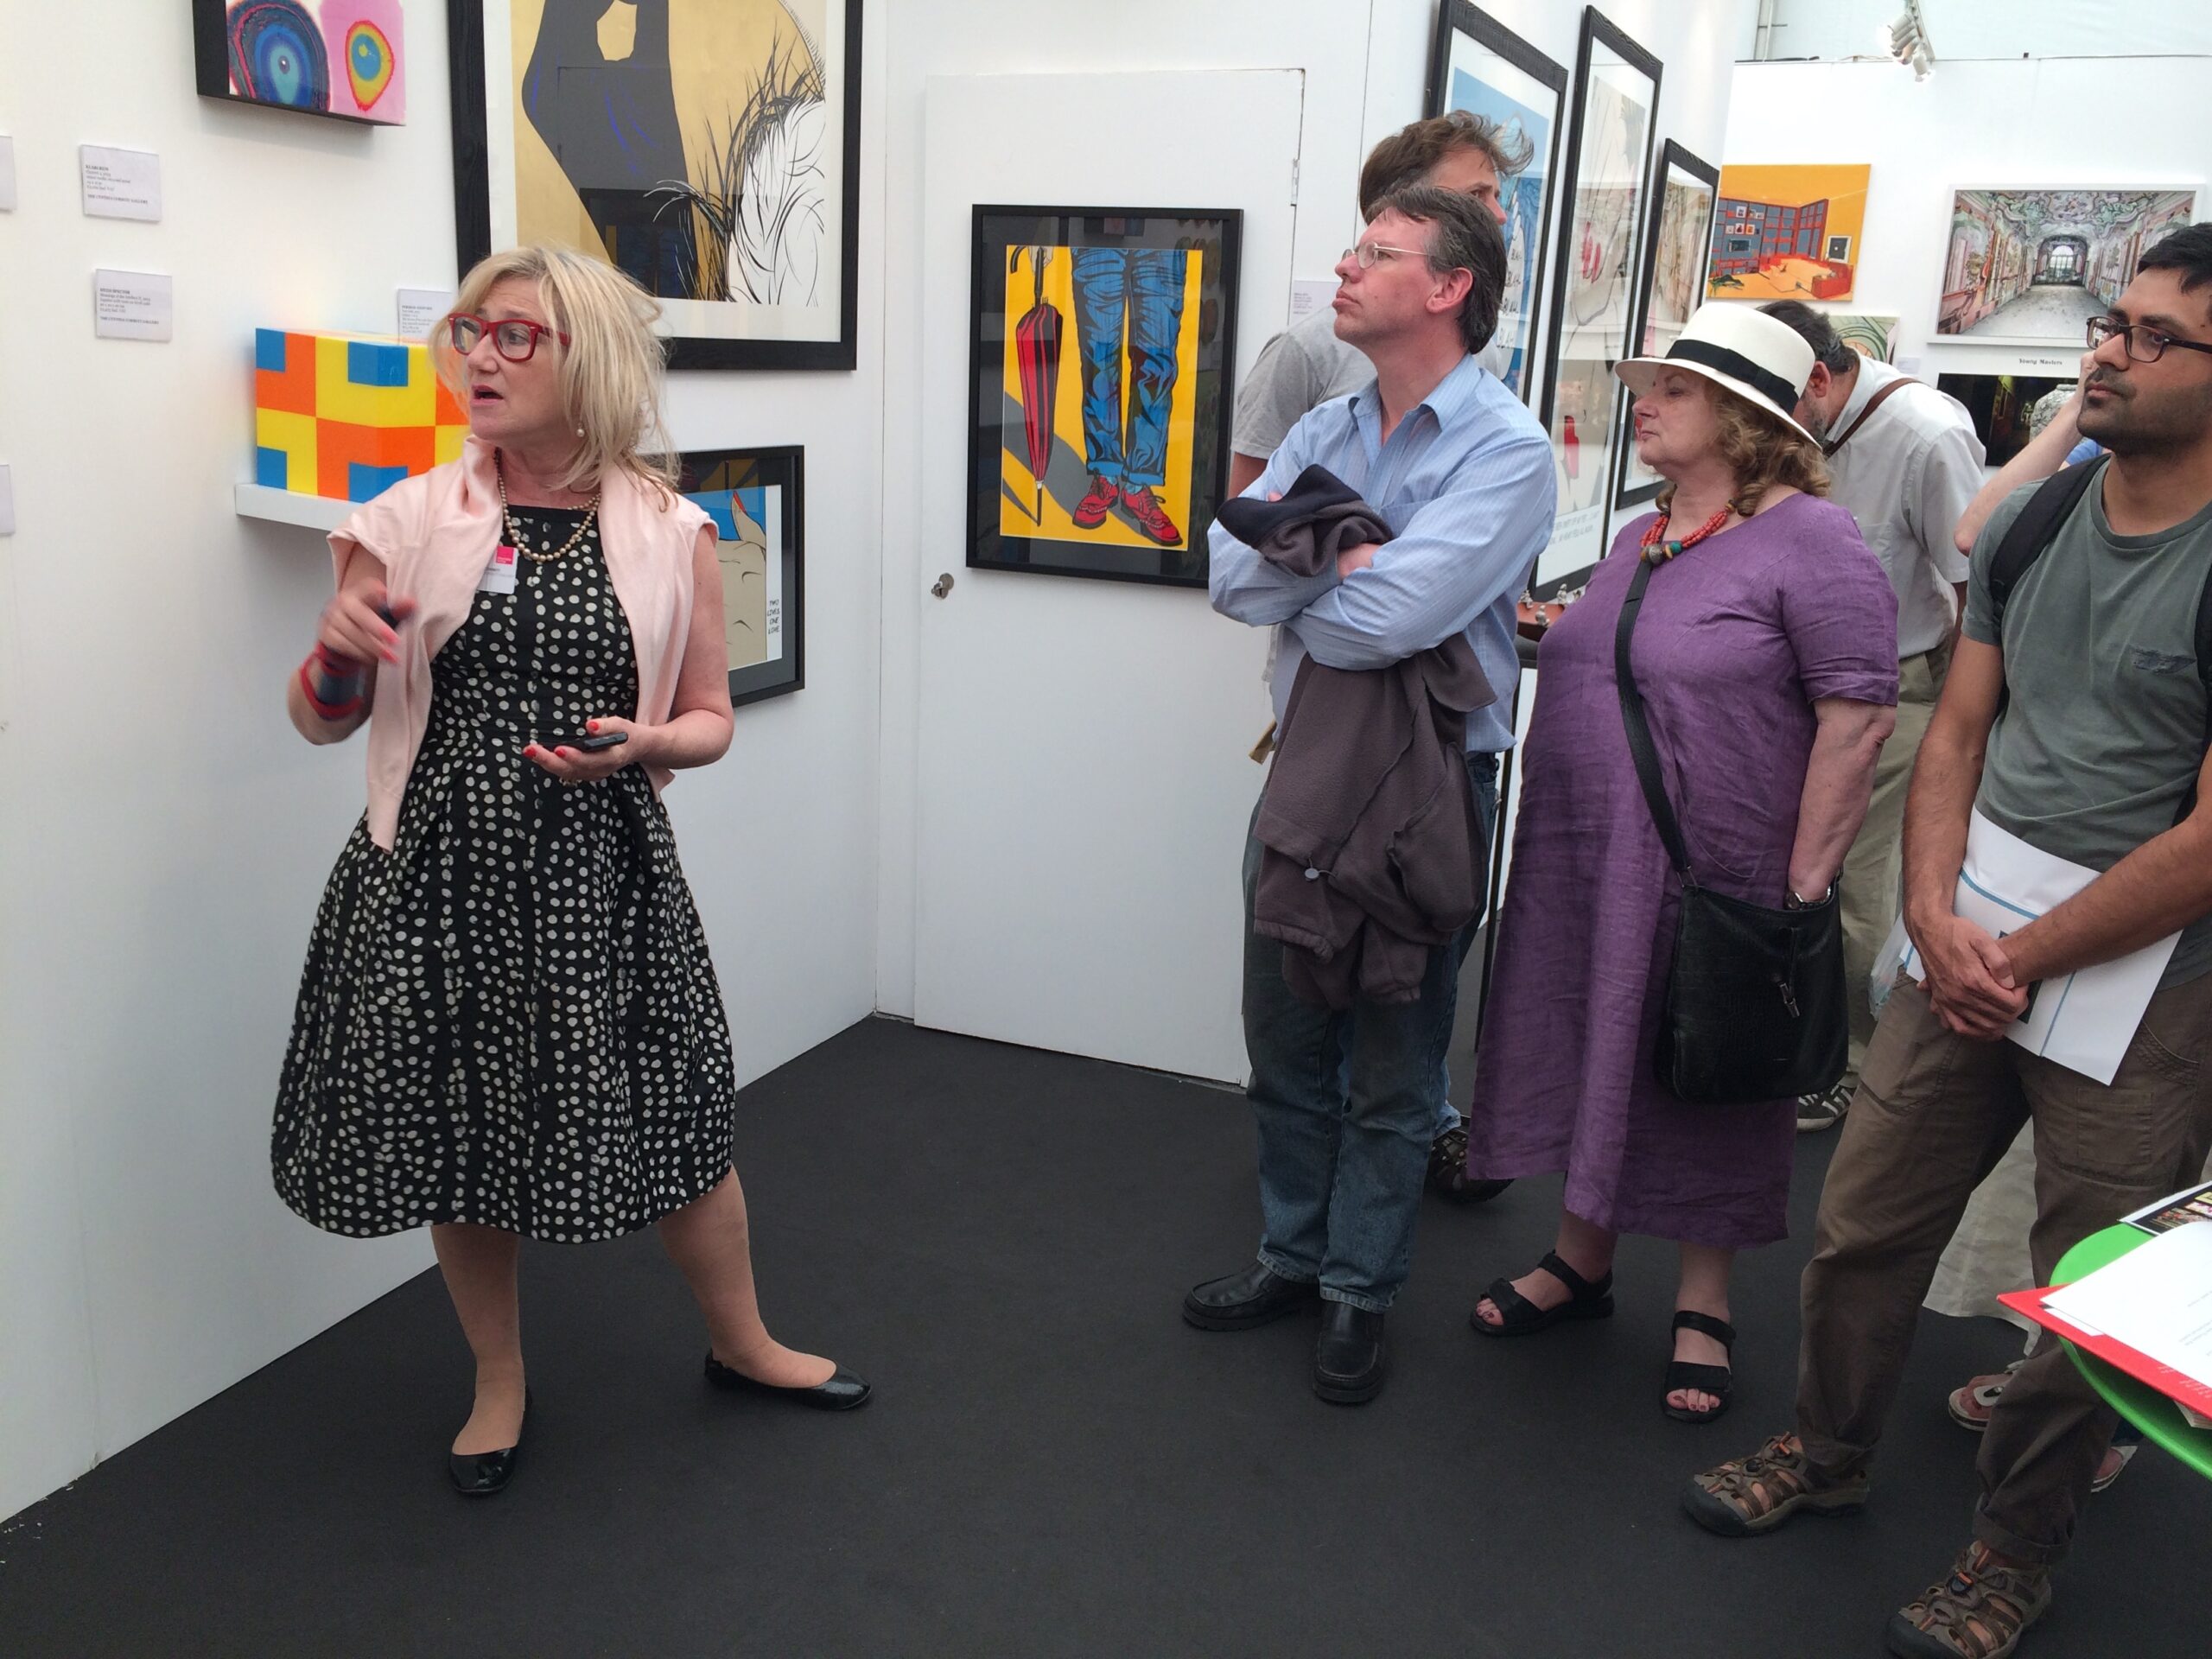 Cynthia Corbett introduces visitors to her fair stand